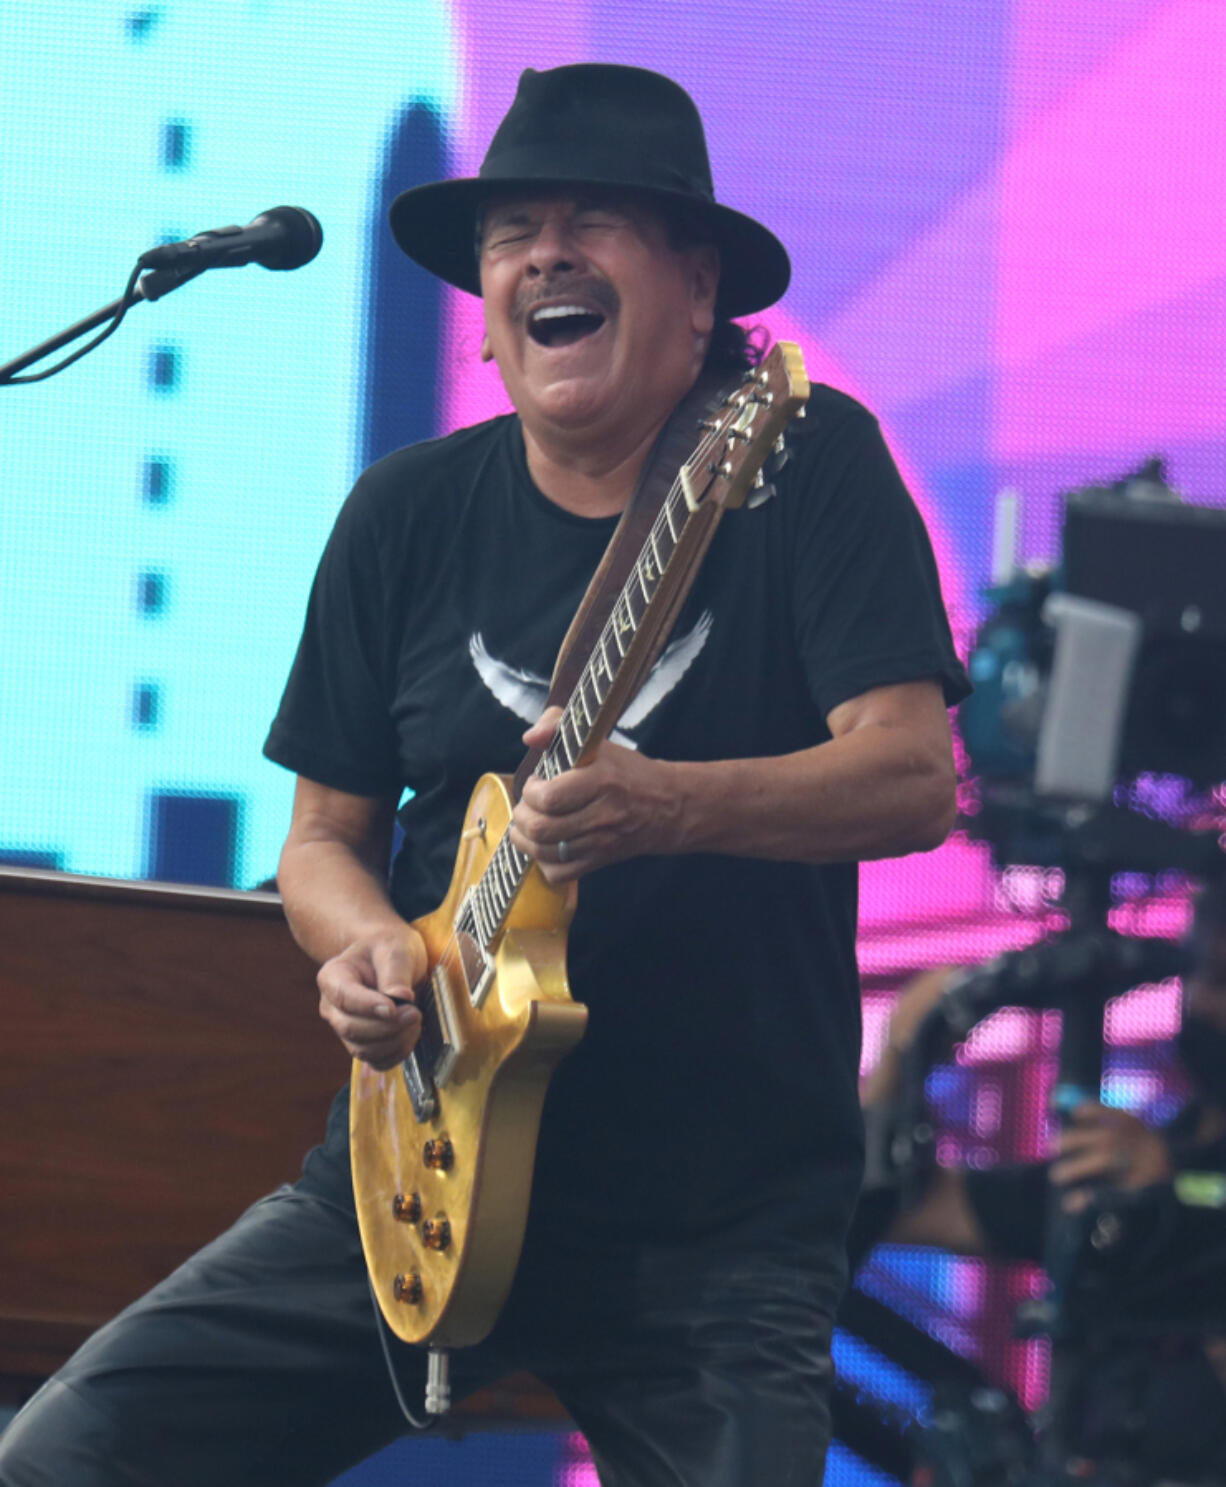 Carlos Santana has been leading Santana since the 1960s and is its only original member still in the band.